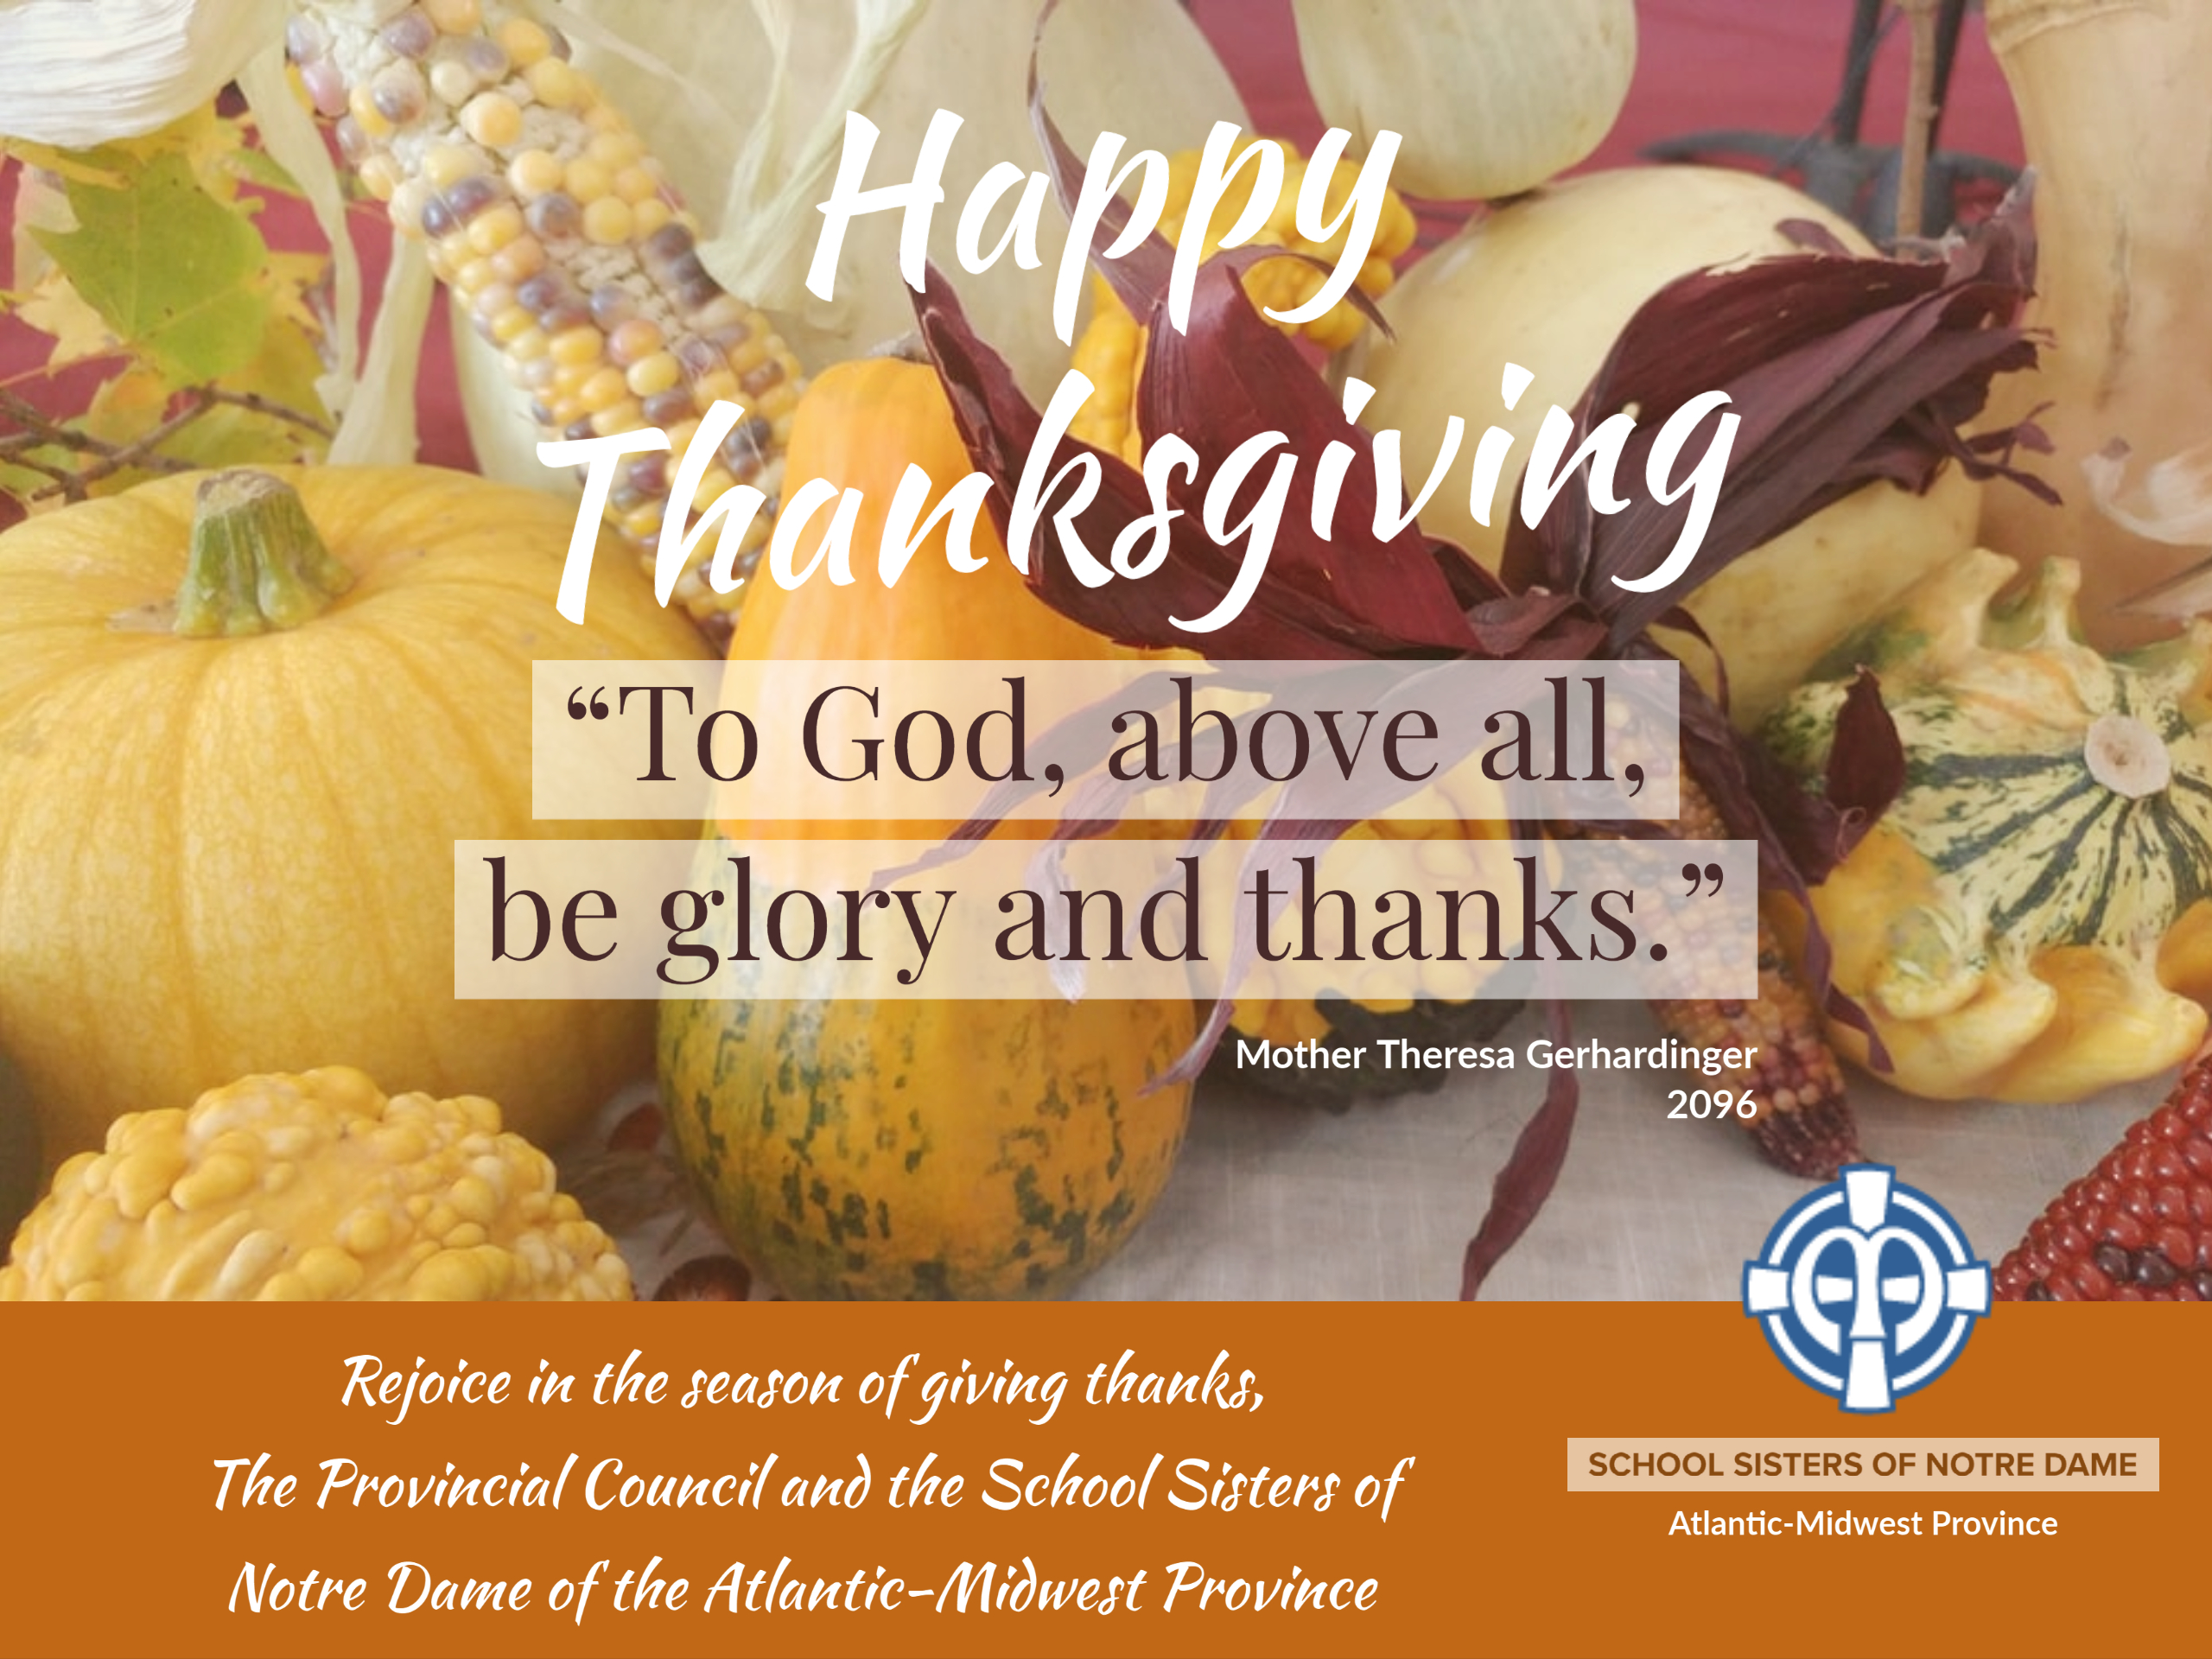 Happy Canadian Thanksgiving Day! School Sisters of Notre Dame